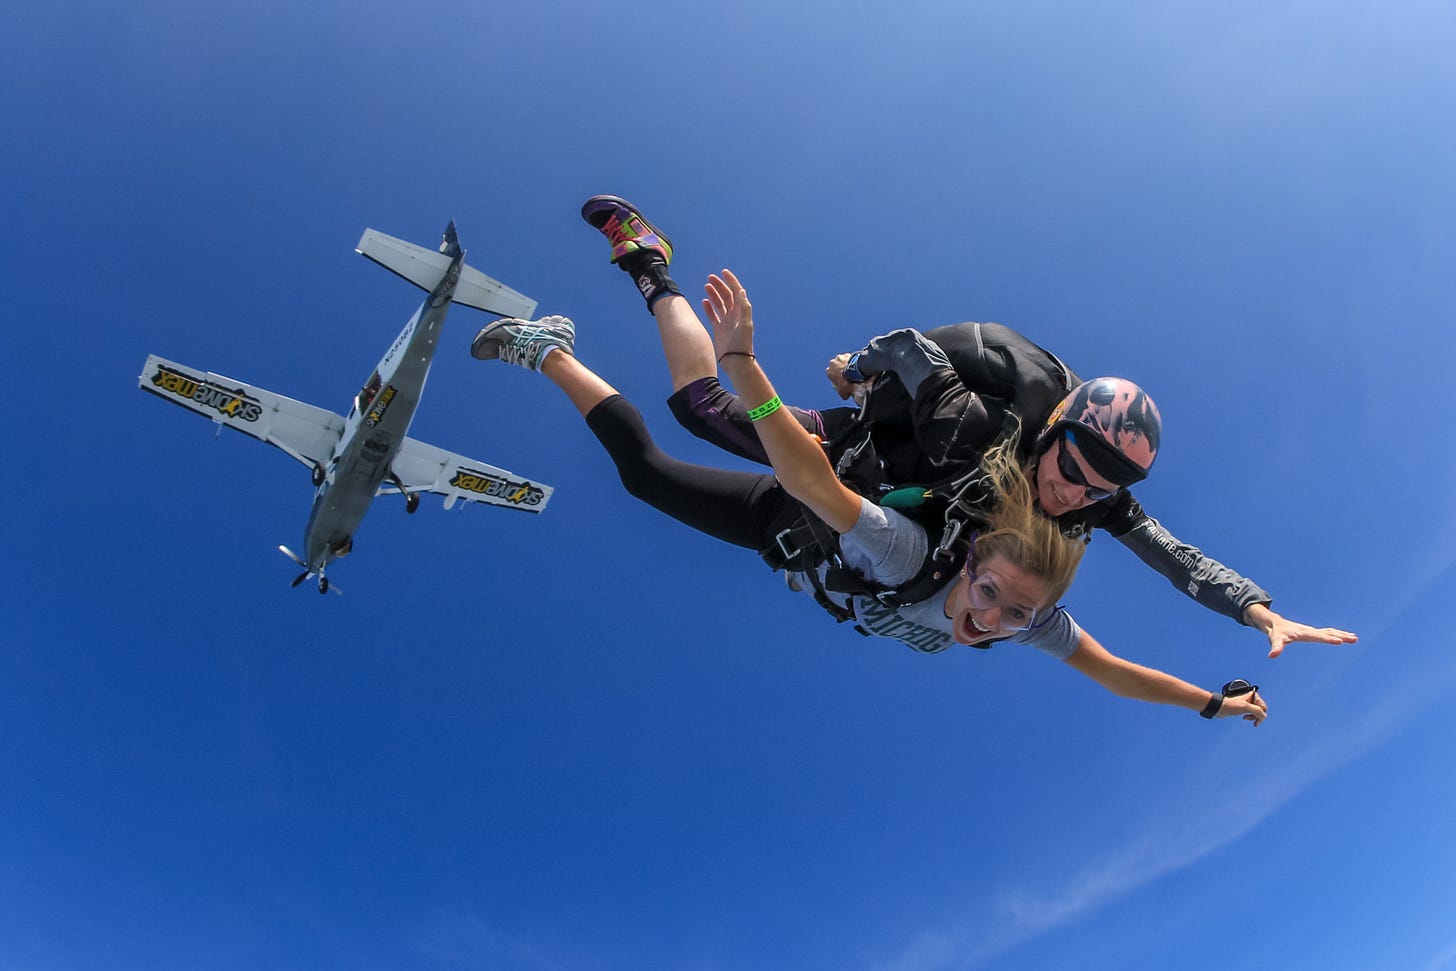 Tandem Skydiving Explained: What is a Tandem Jump?